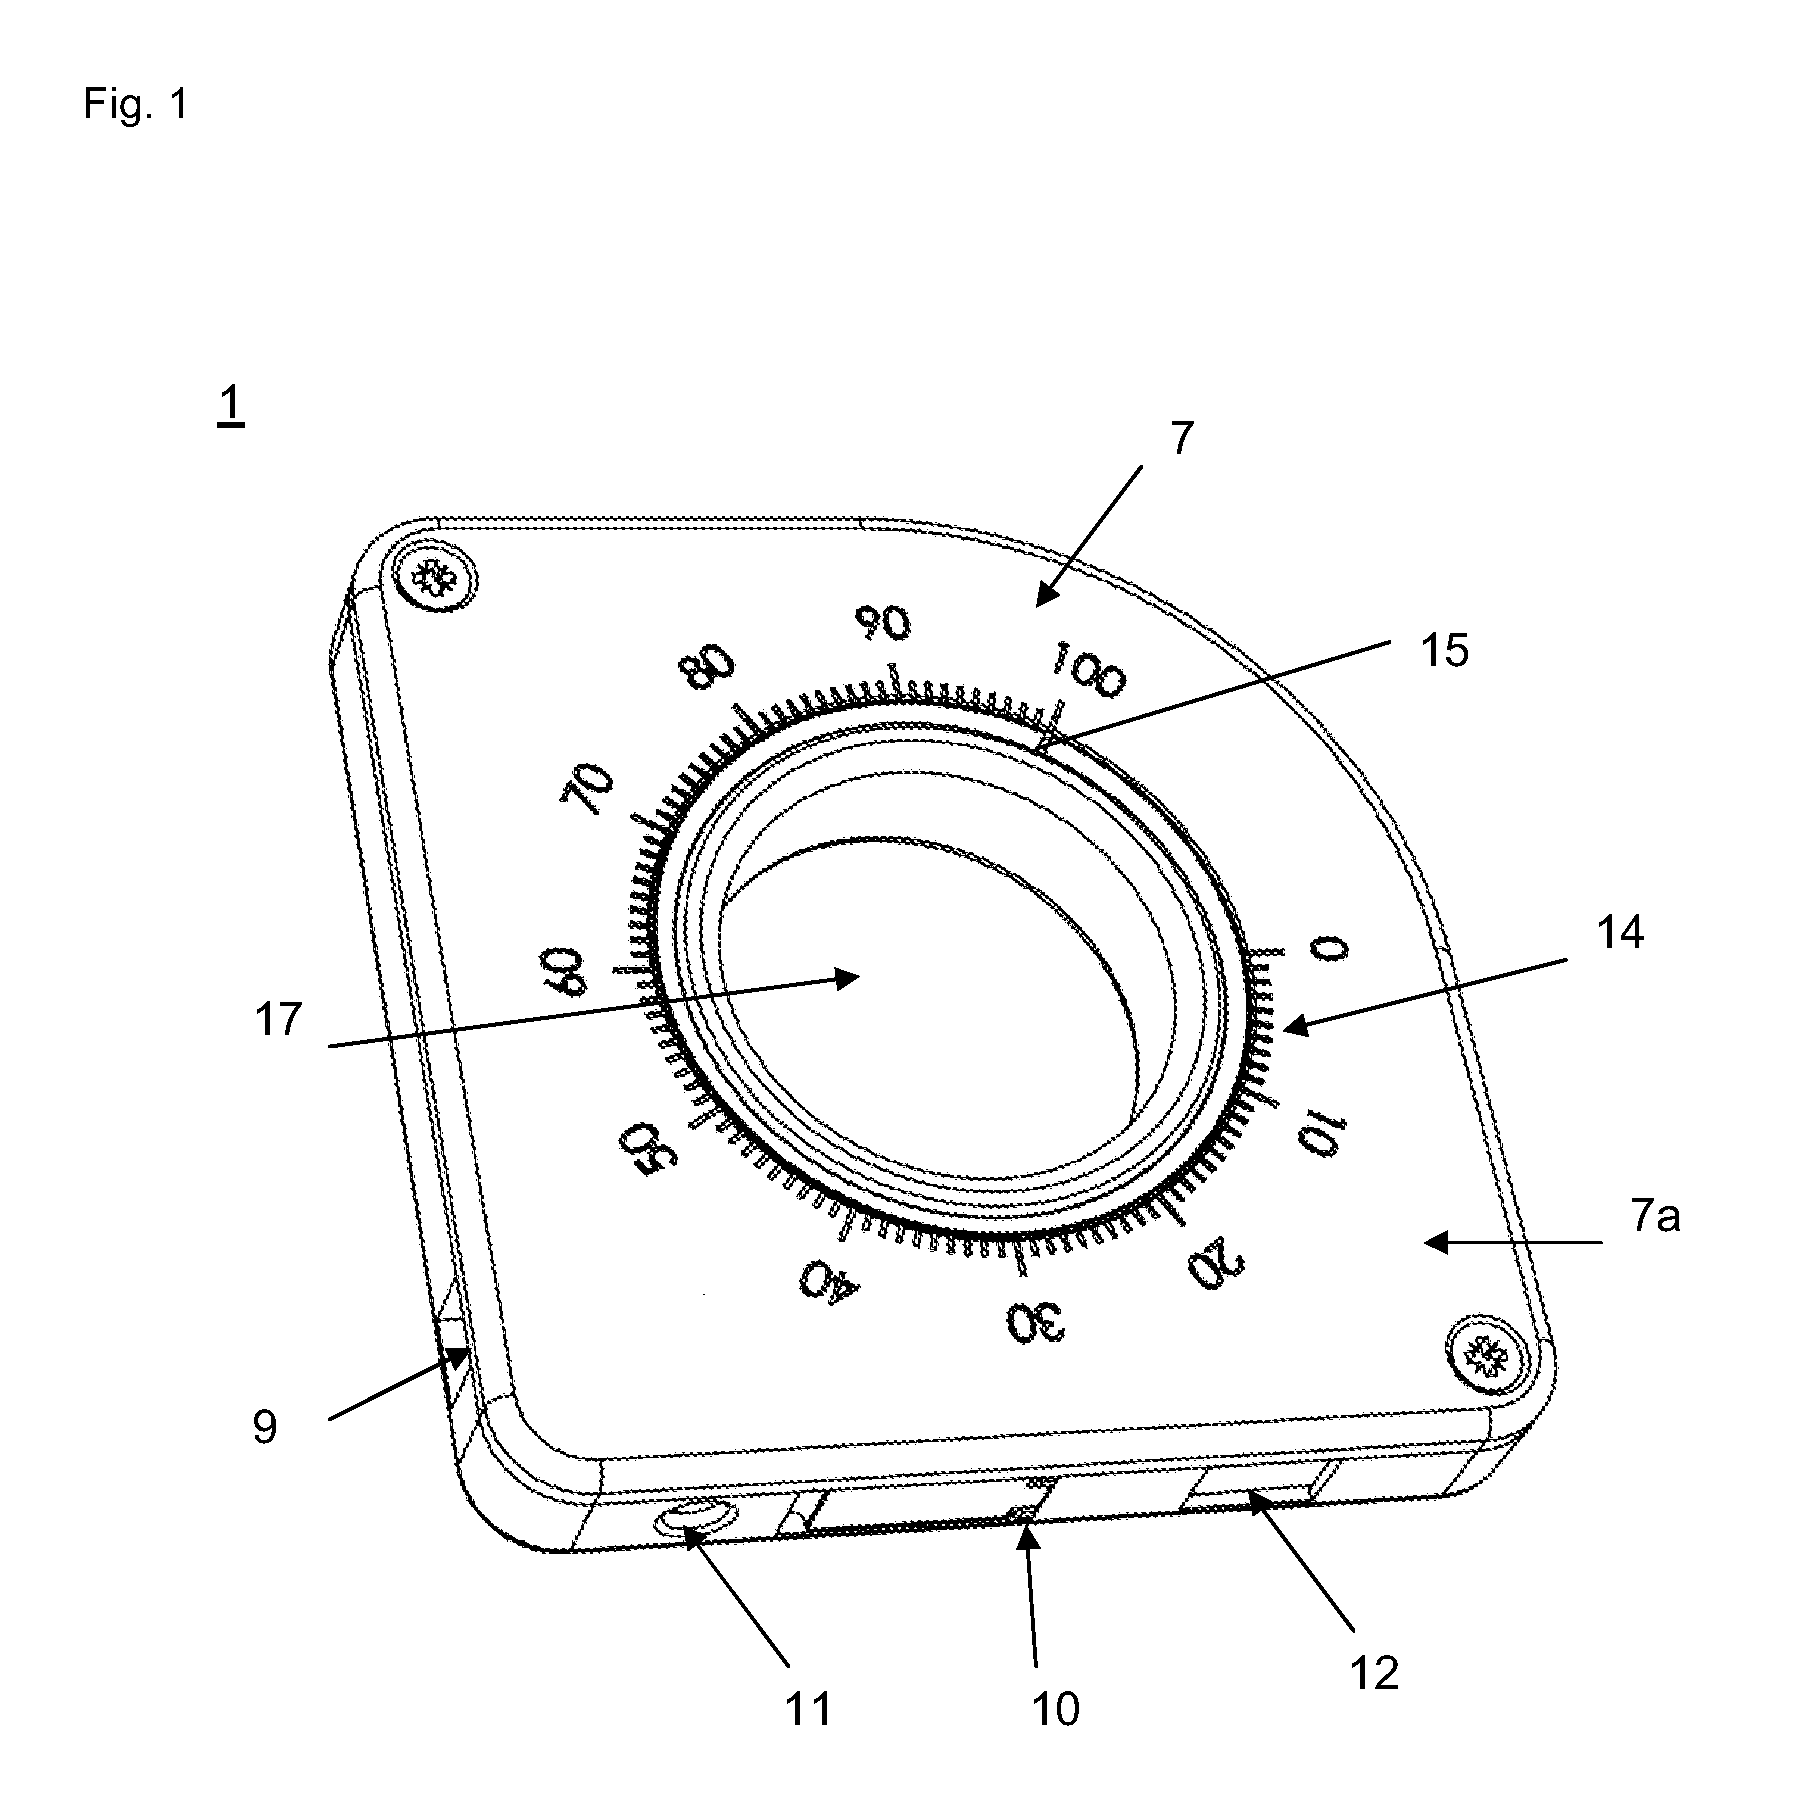 Device and system for assembling chain components to a chain containing radiation sources